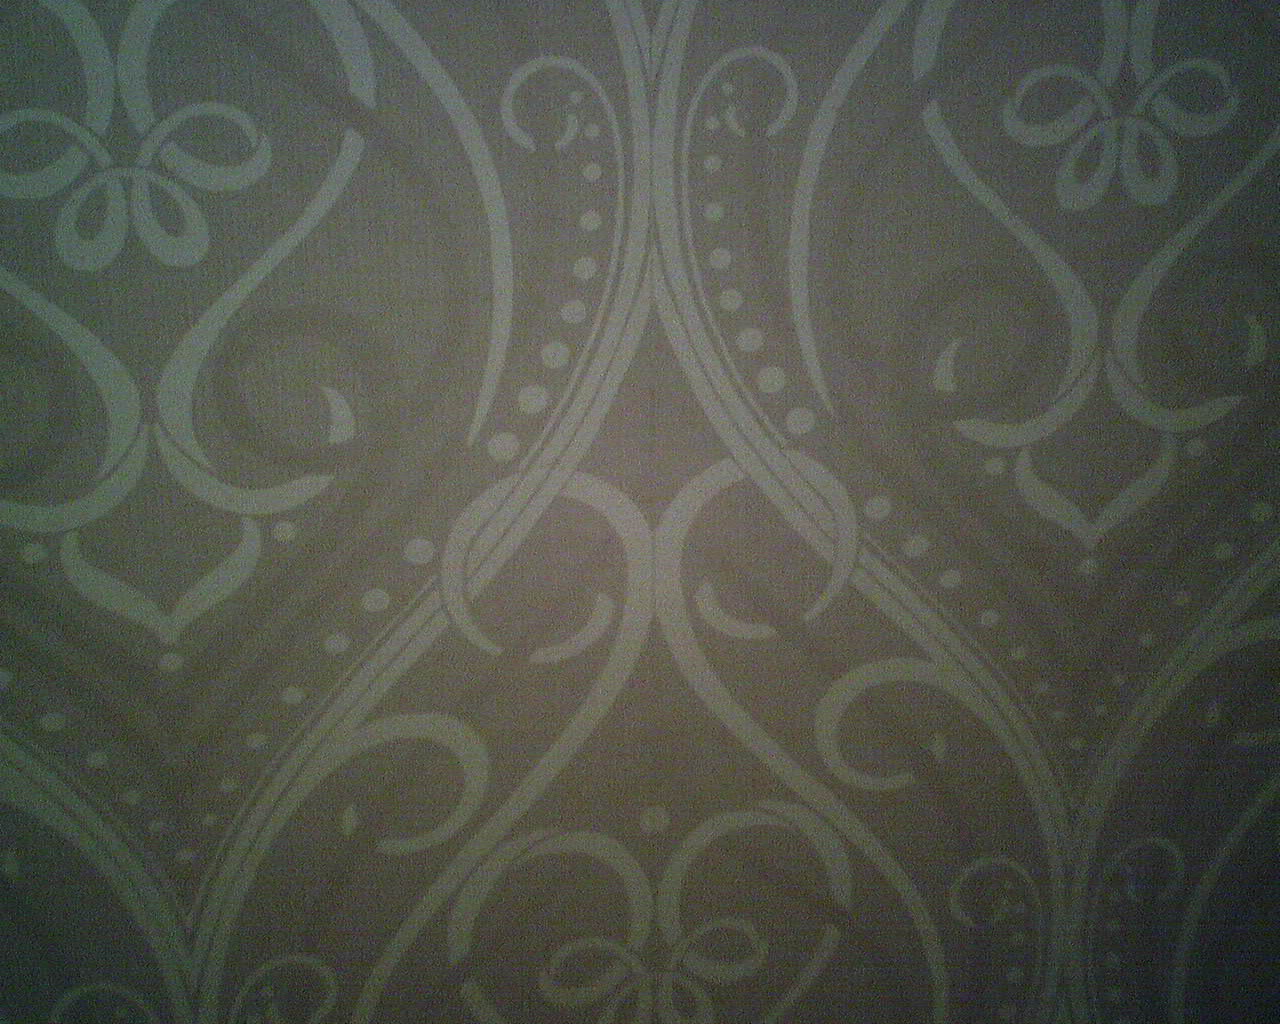 And Stiffer Than Ordinary Wallpaper The Seams Tend To Show More